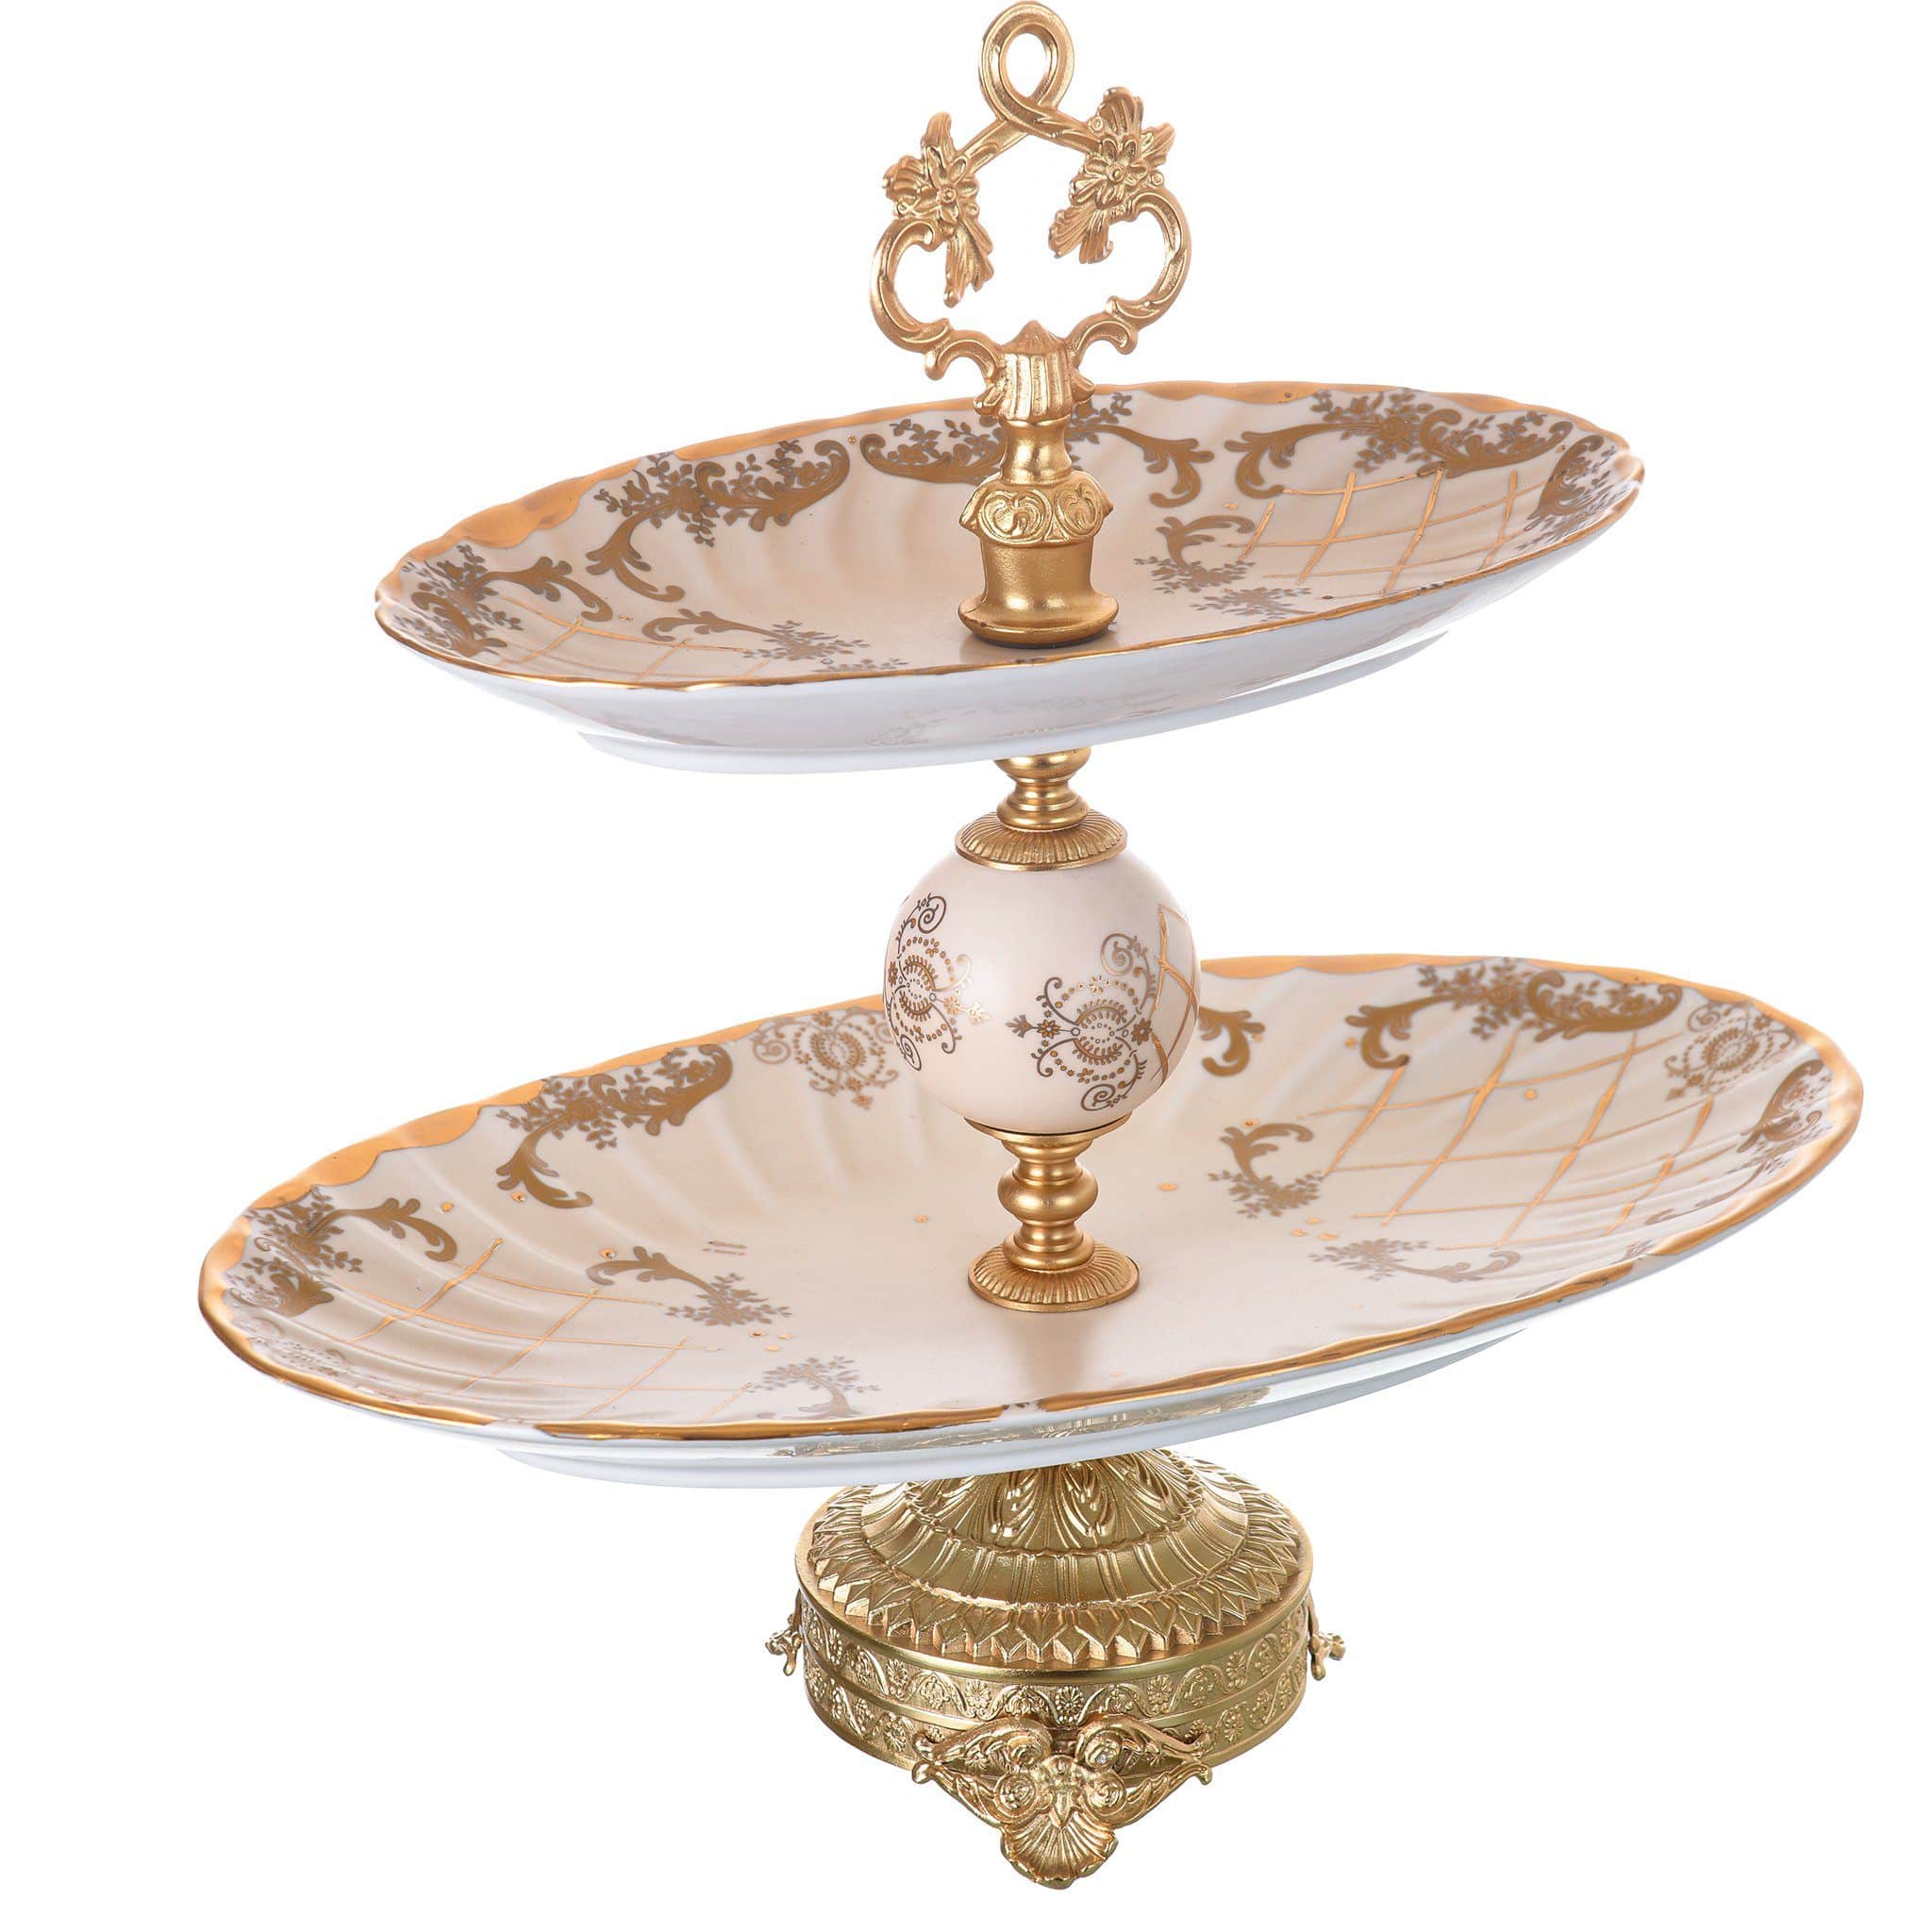 Caroline - Imperial Oval Stand 2 Tiers with Gold Plated Base - Beige & Gold - 43cm - 58000580